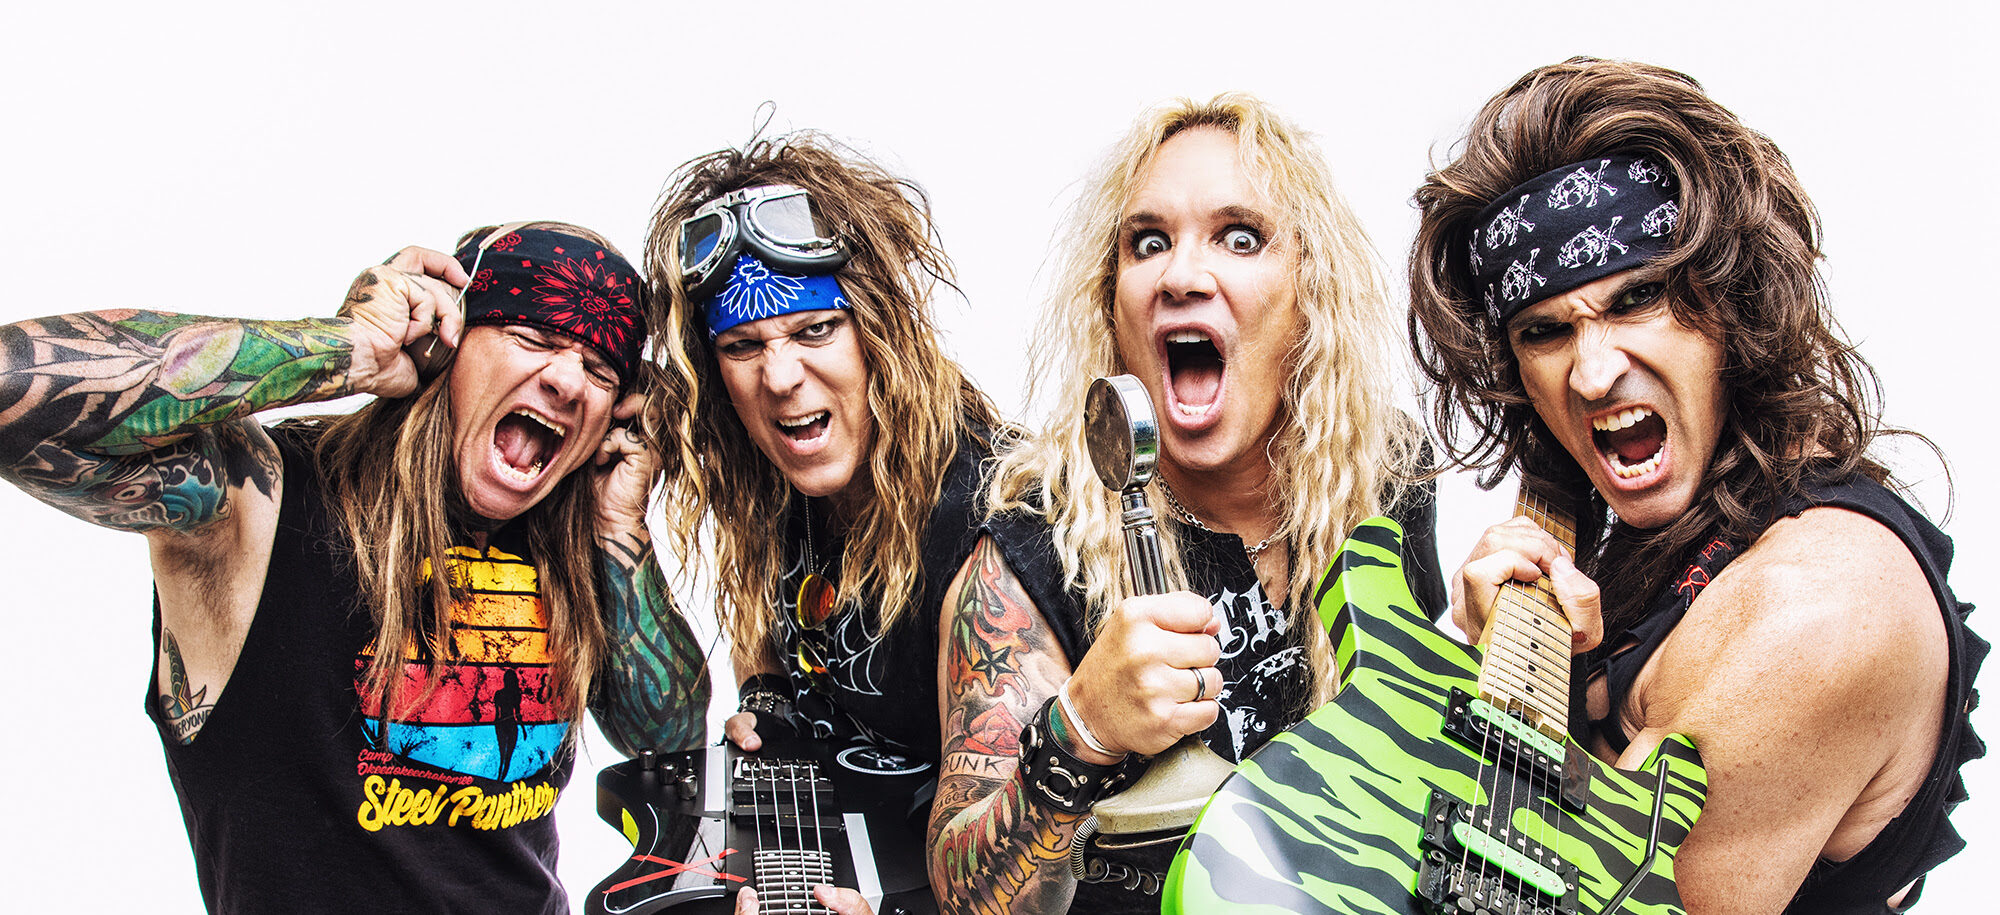 Steel Panther tour manager joins band as permanent bassist ahead of Australian tour